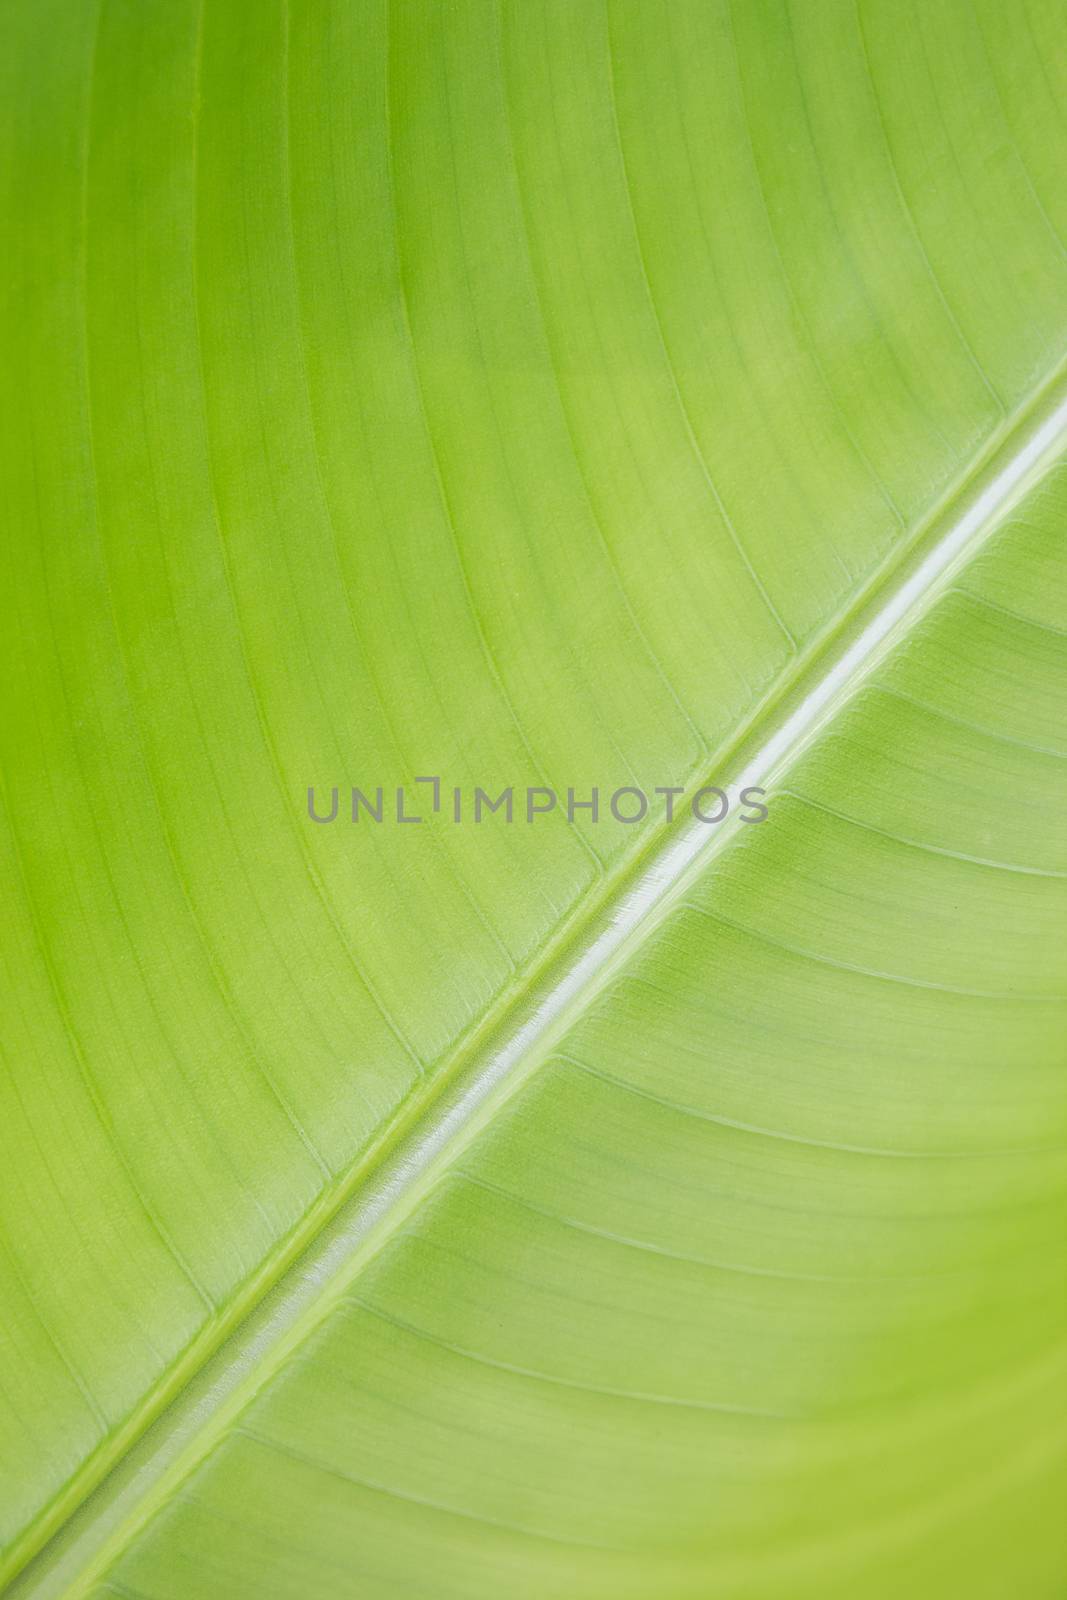 Abstract striped nature background, Details of Heliconia leaf, leaves pattern